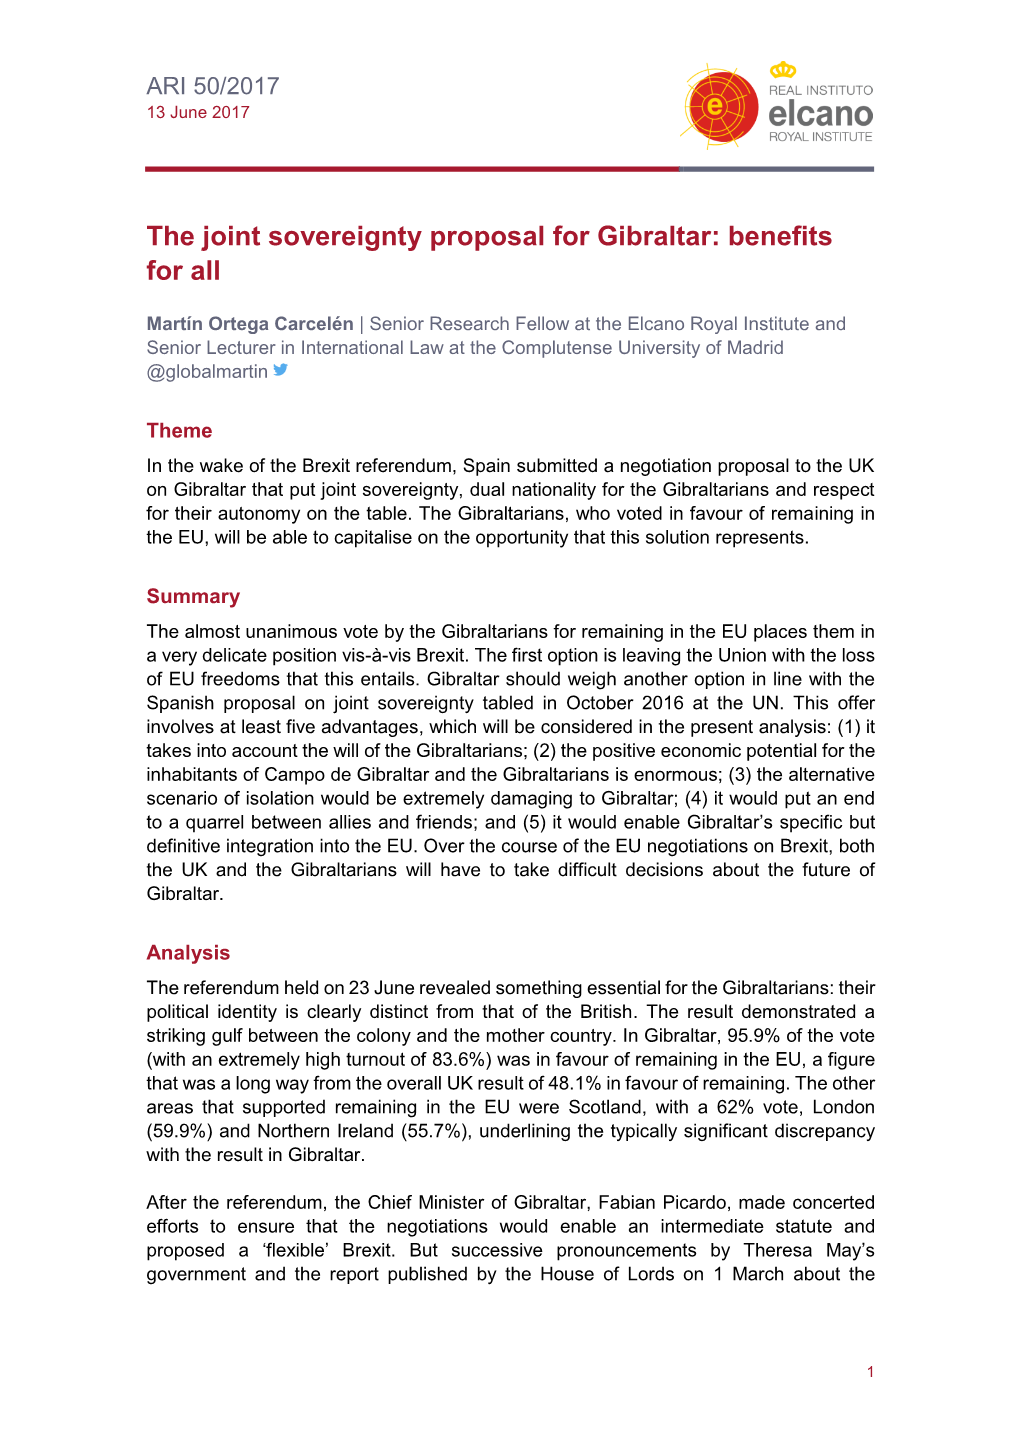 The Joint Sovereignty Proposal for Gibraltar: Benefits for All